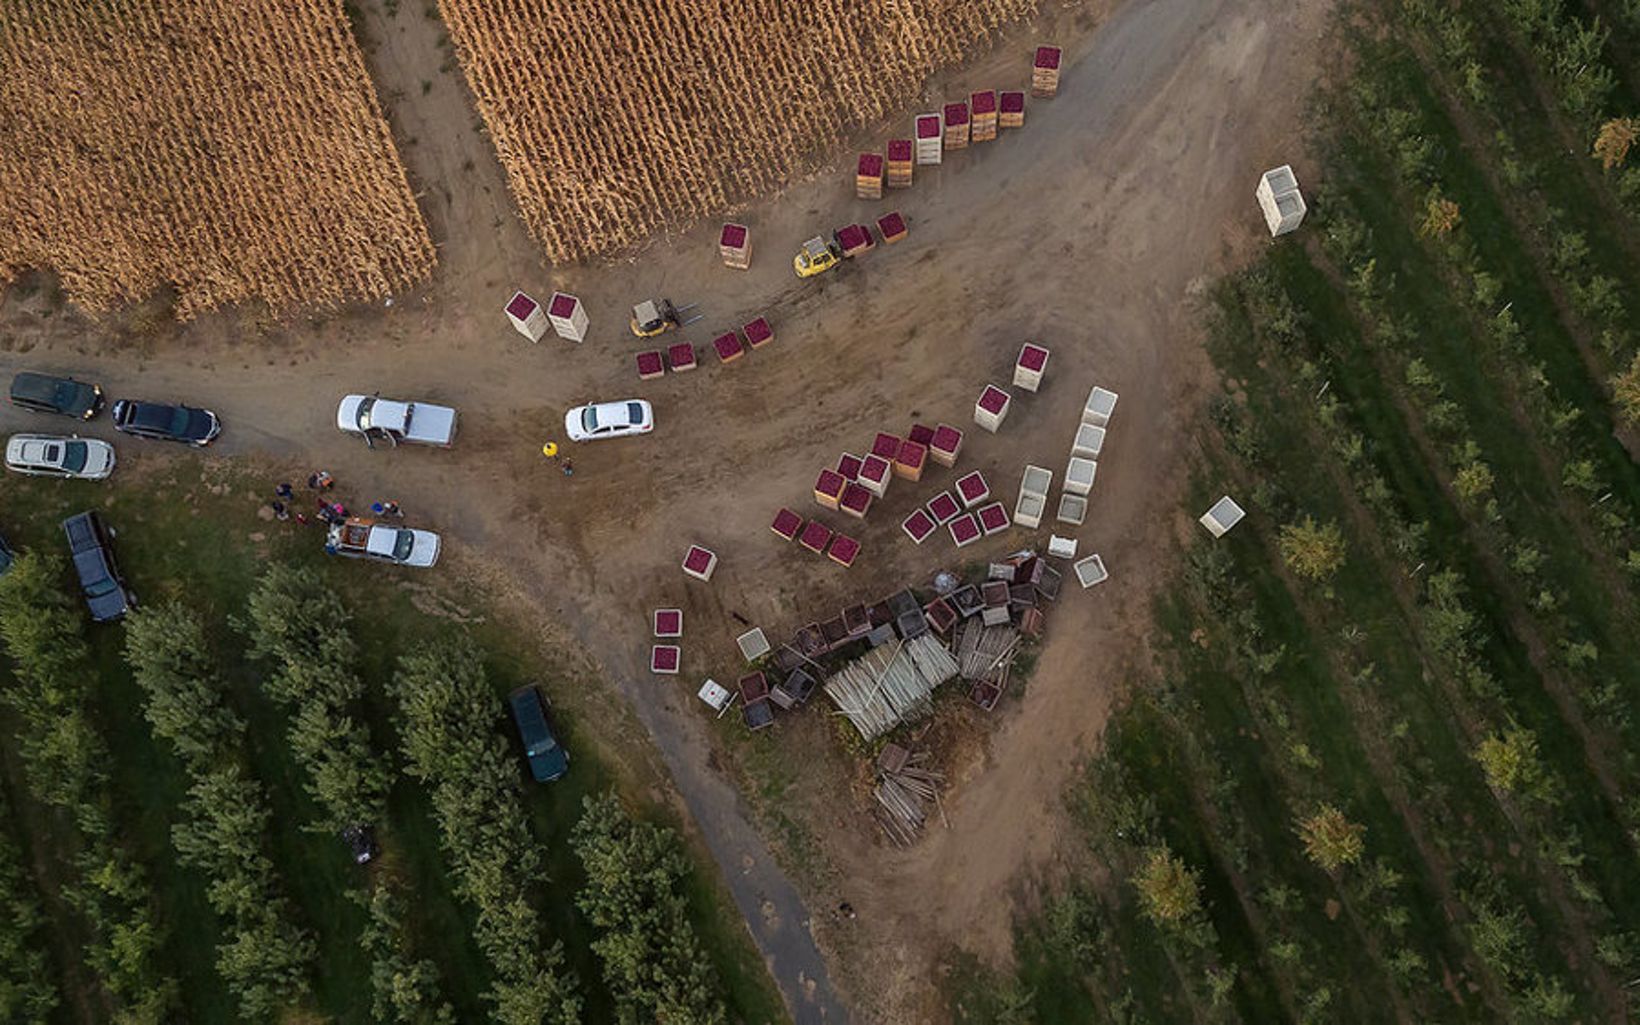 An aerial view of the apple harvest at an orchard in Eastern Washington state.